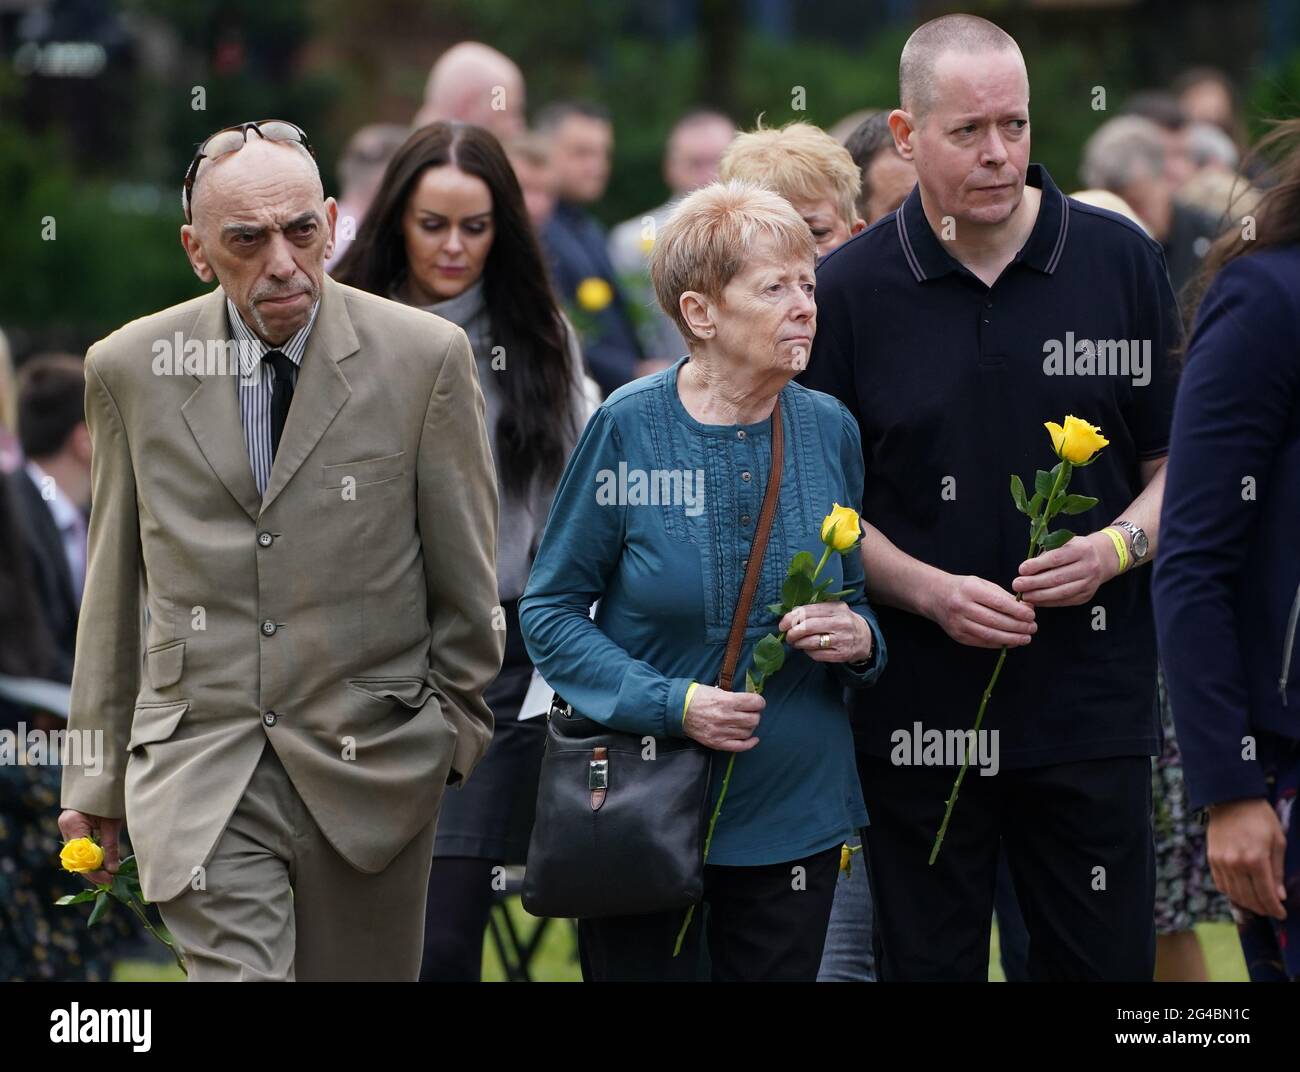 Family members of Dr David Wails, including his brother Andrew (right), wait to lay a single yellow rose each at the bandstand in Forbury Gardens in Reading, during a memorial service to mark the one year anniversary of the terror attack in which Dr David Wails, 49 and his two friends, James Furlong, 36, and Joseph Ritchie-Bennett, 39, were fatally stabbed by 26-year-old failed Libyan asylum seeker Khairi Saadallah, whilst enjoying a summer evening together as lockdown restrictions eased, on June 20 last year. Picture date: Sunday June 20, 2021. Stock Photo